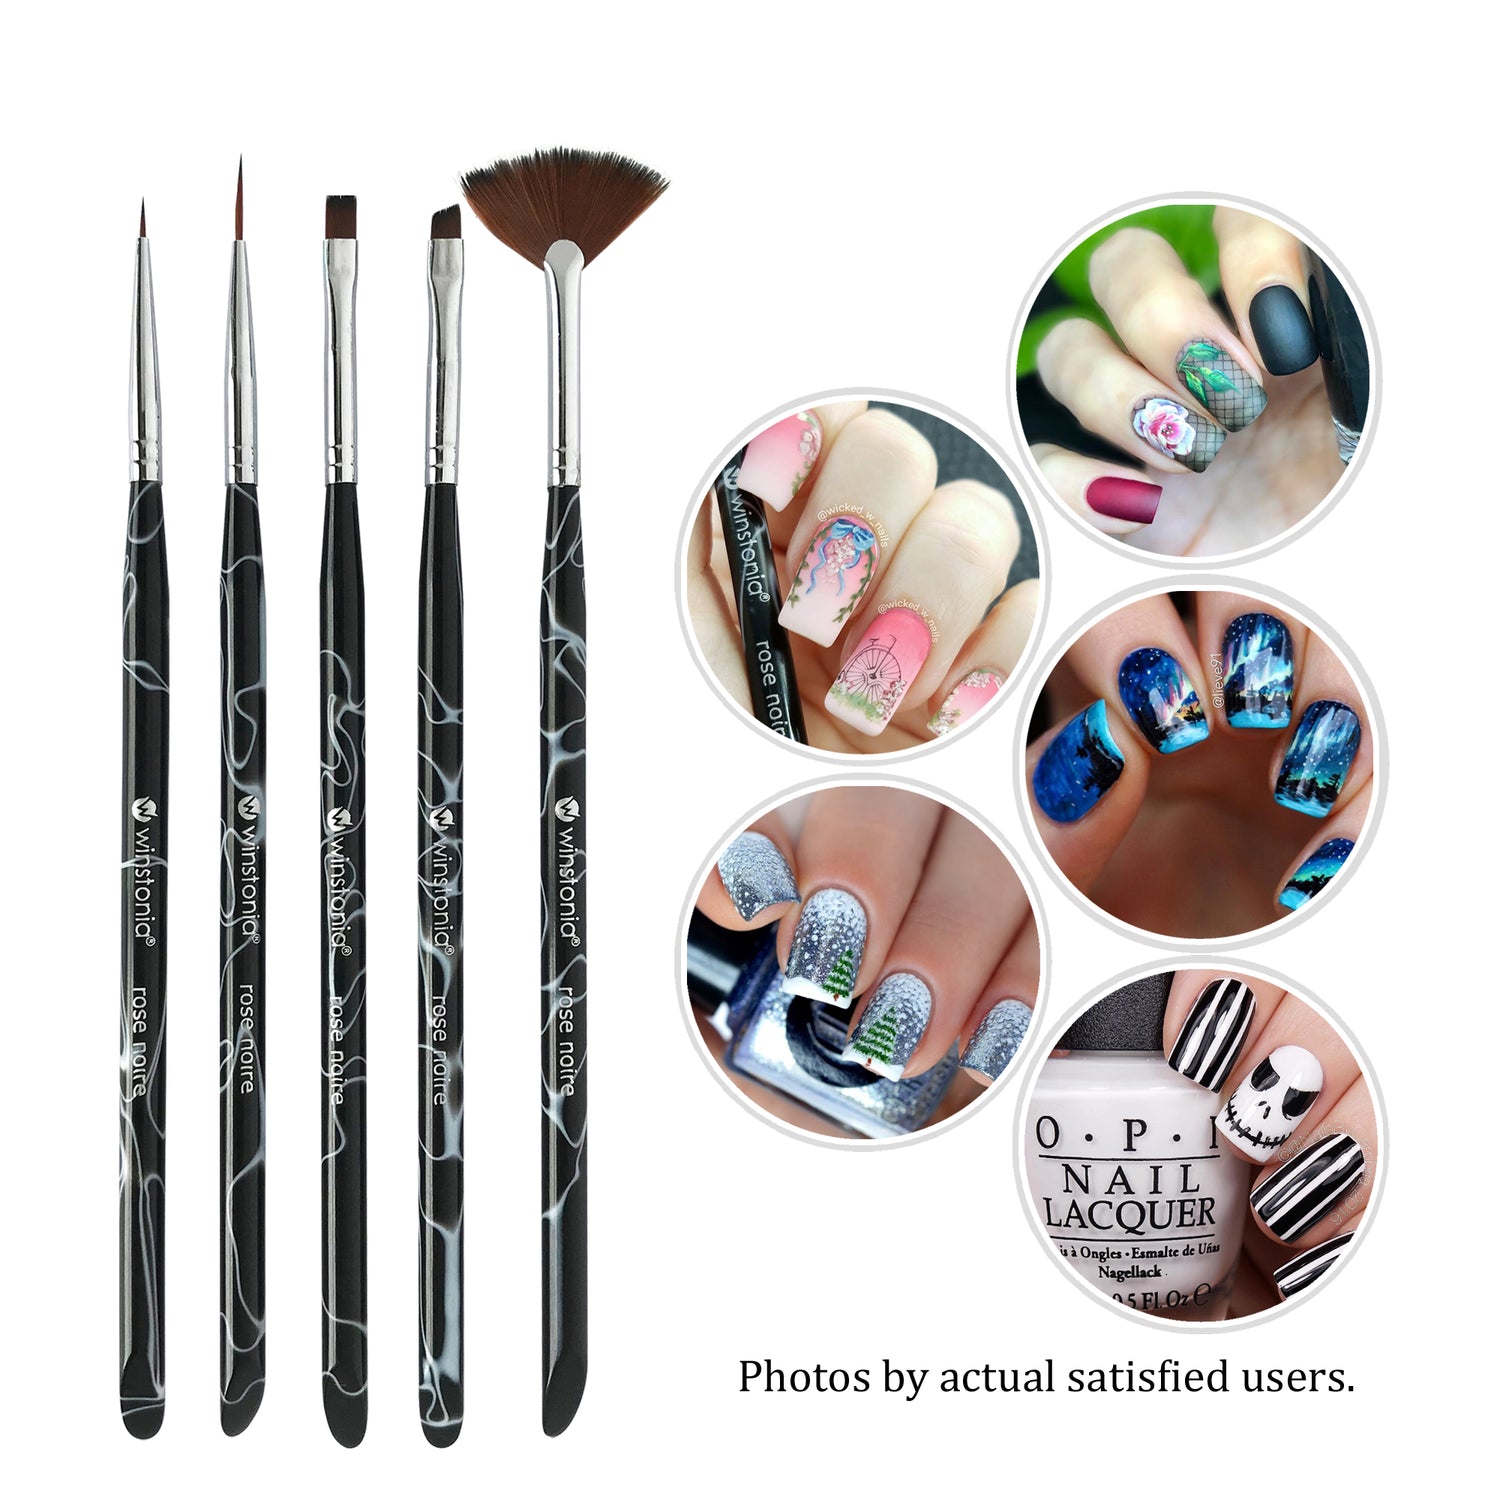 Winstonia Super Fine Nail Art Brush Set for Thin Lines Tiny Details Fine  Drawing Delicate Coloring. 3 pcs Brushes Kit - BERRY WINE